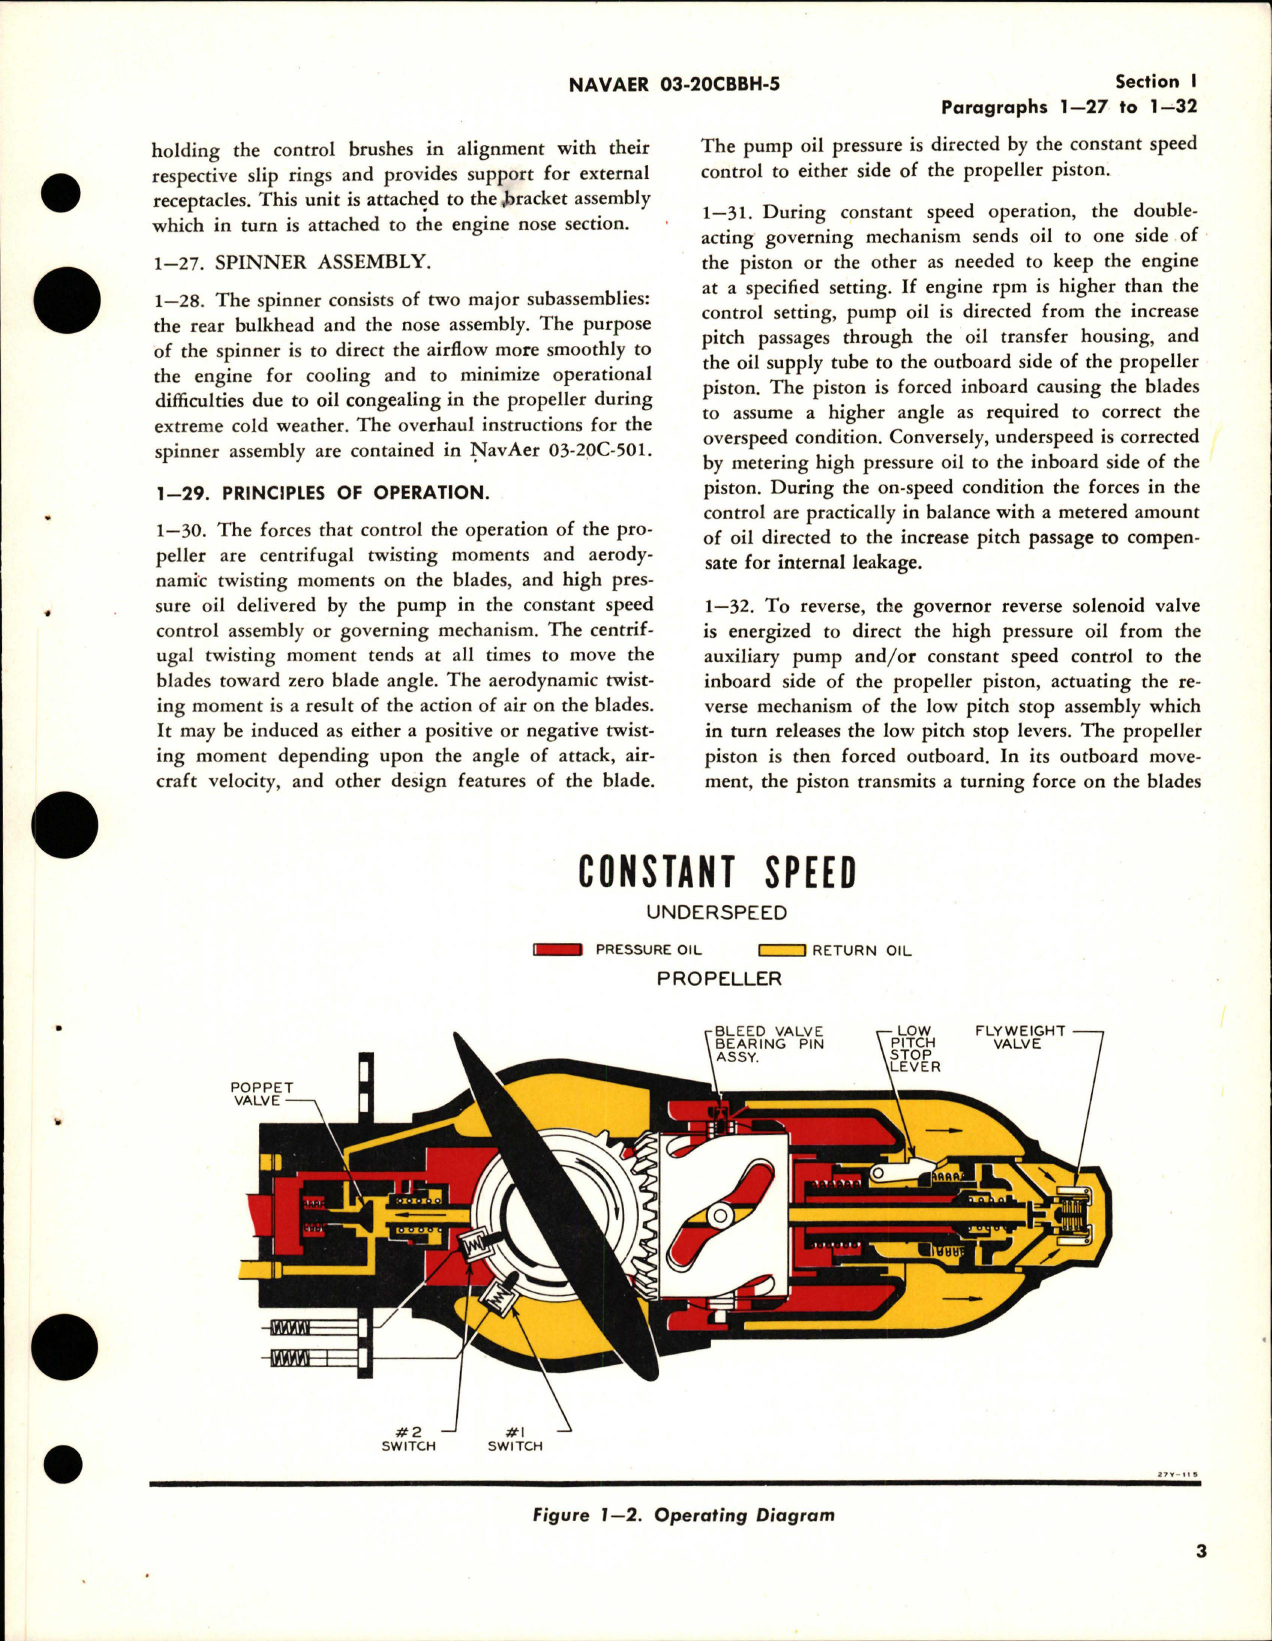 Sample page 7 from AirCorps Library document: Overhaul Instructions for Variable Pitch Propeller - Models 43H60-359 and 43H60-383